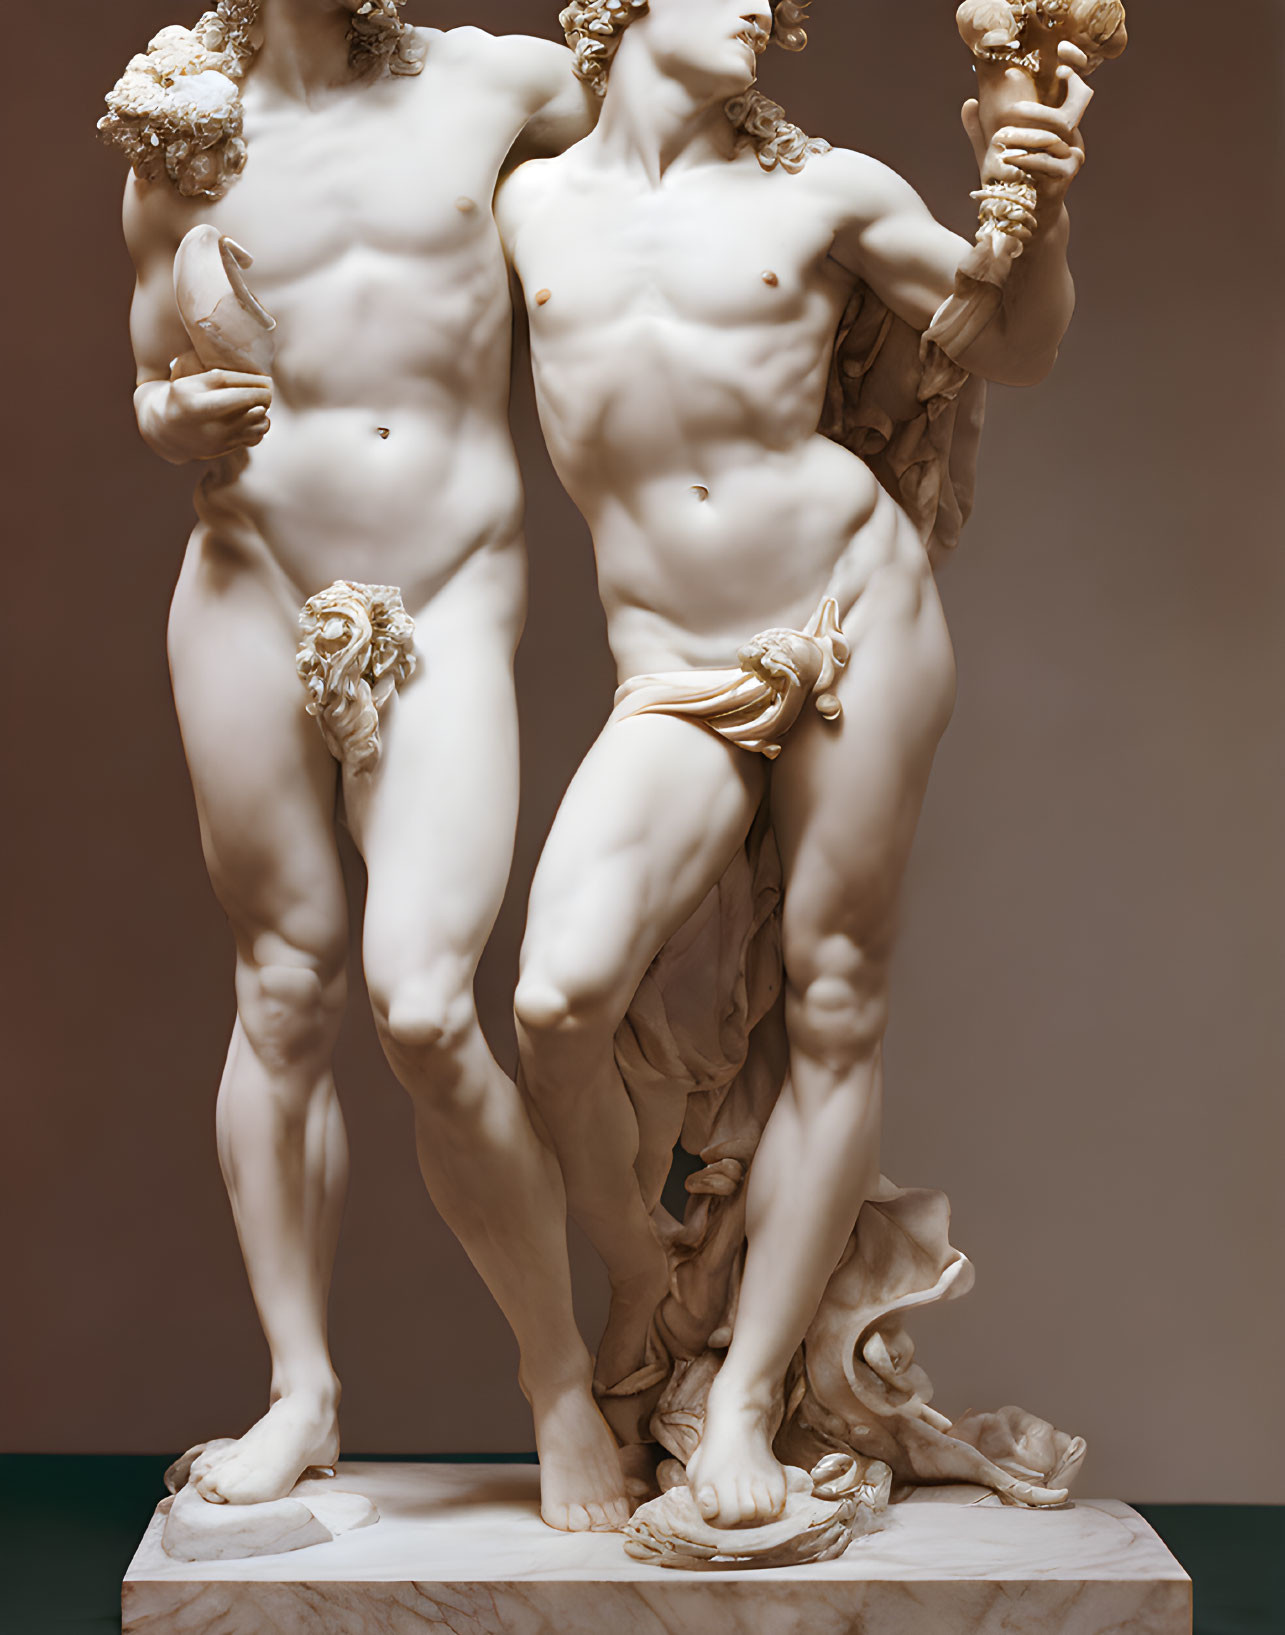 Marble sculpture of two nude figures with detailed musculature and draped cloth.